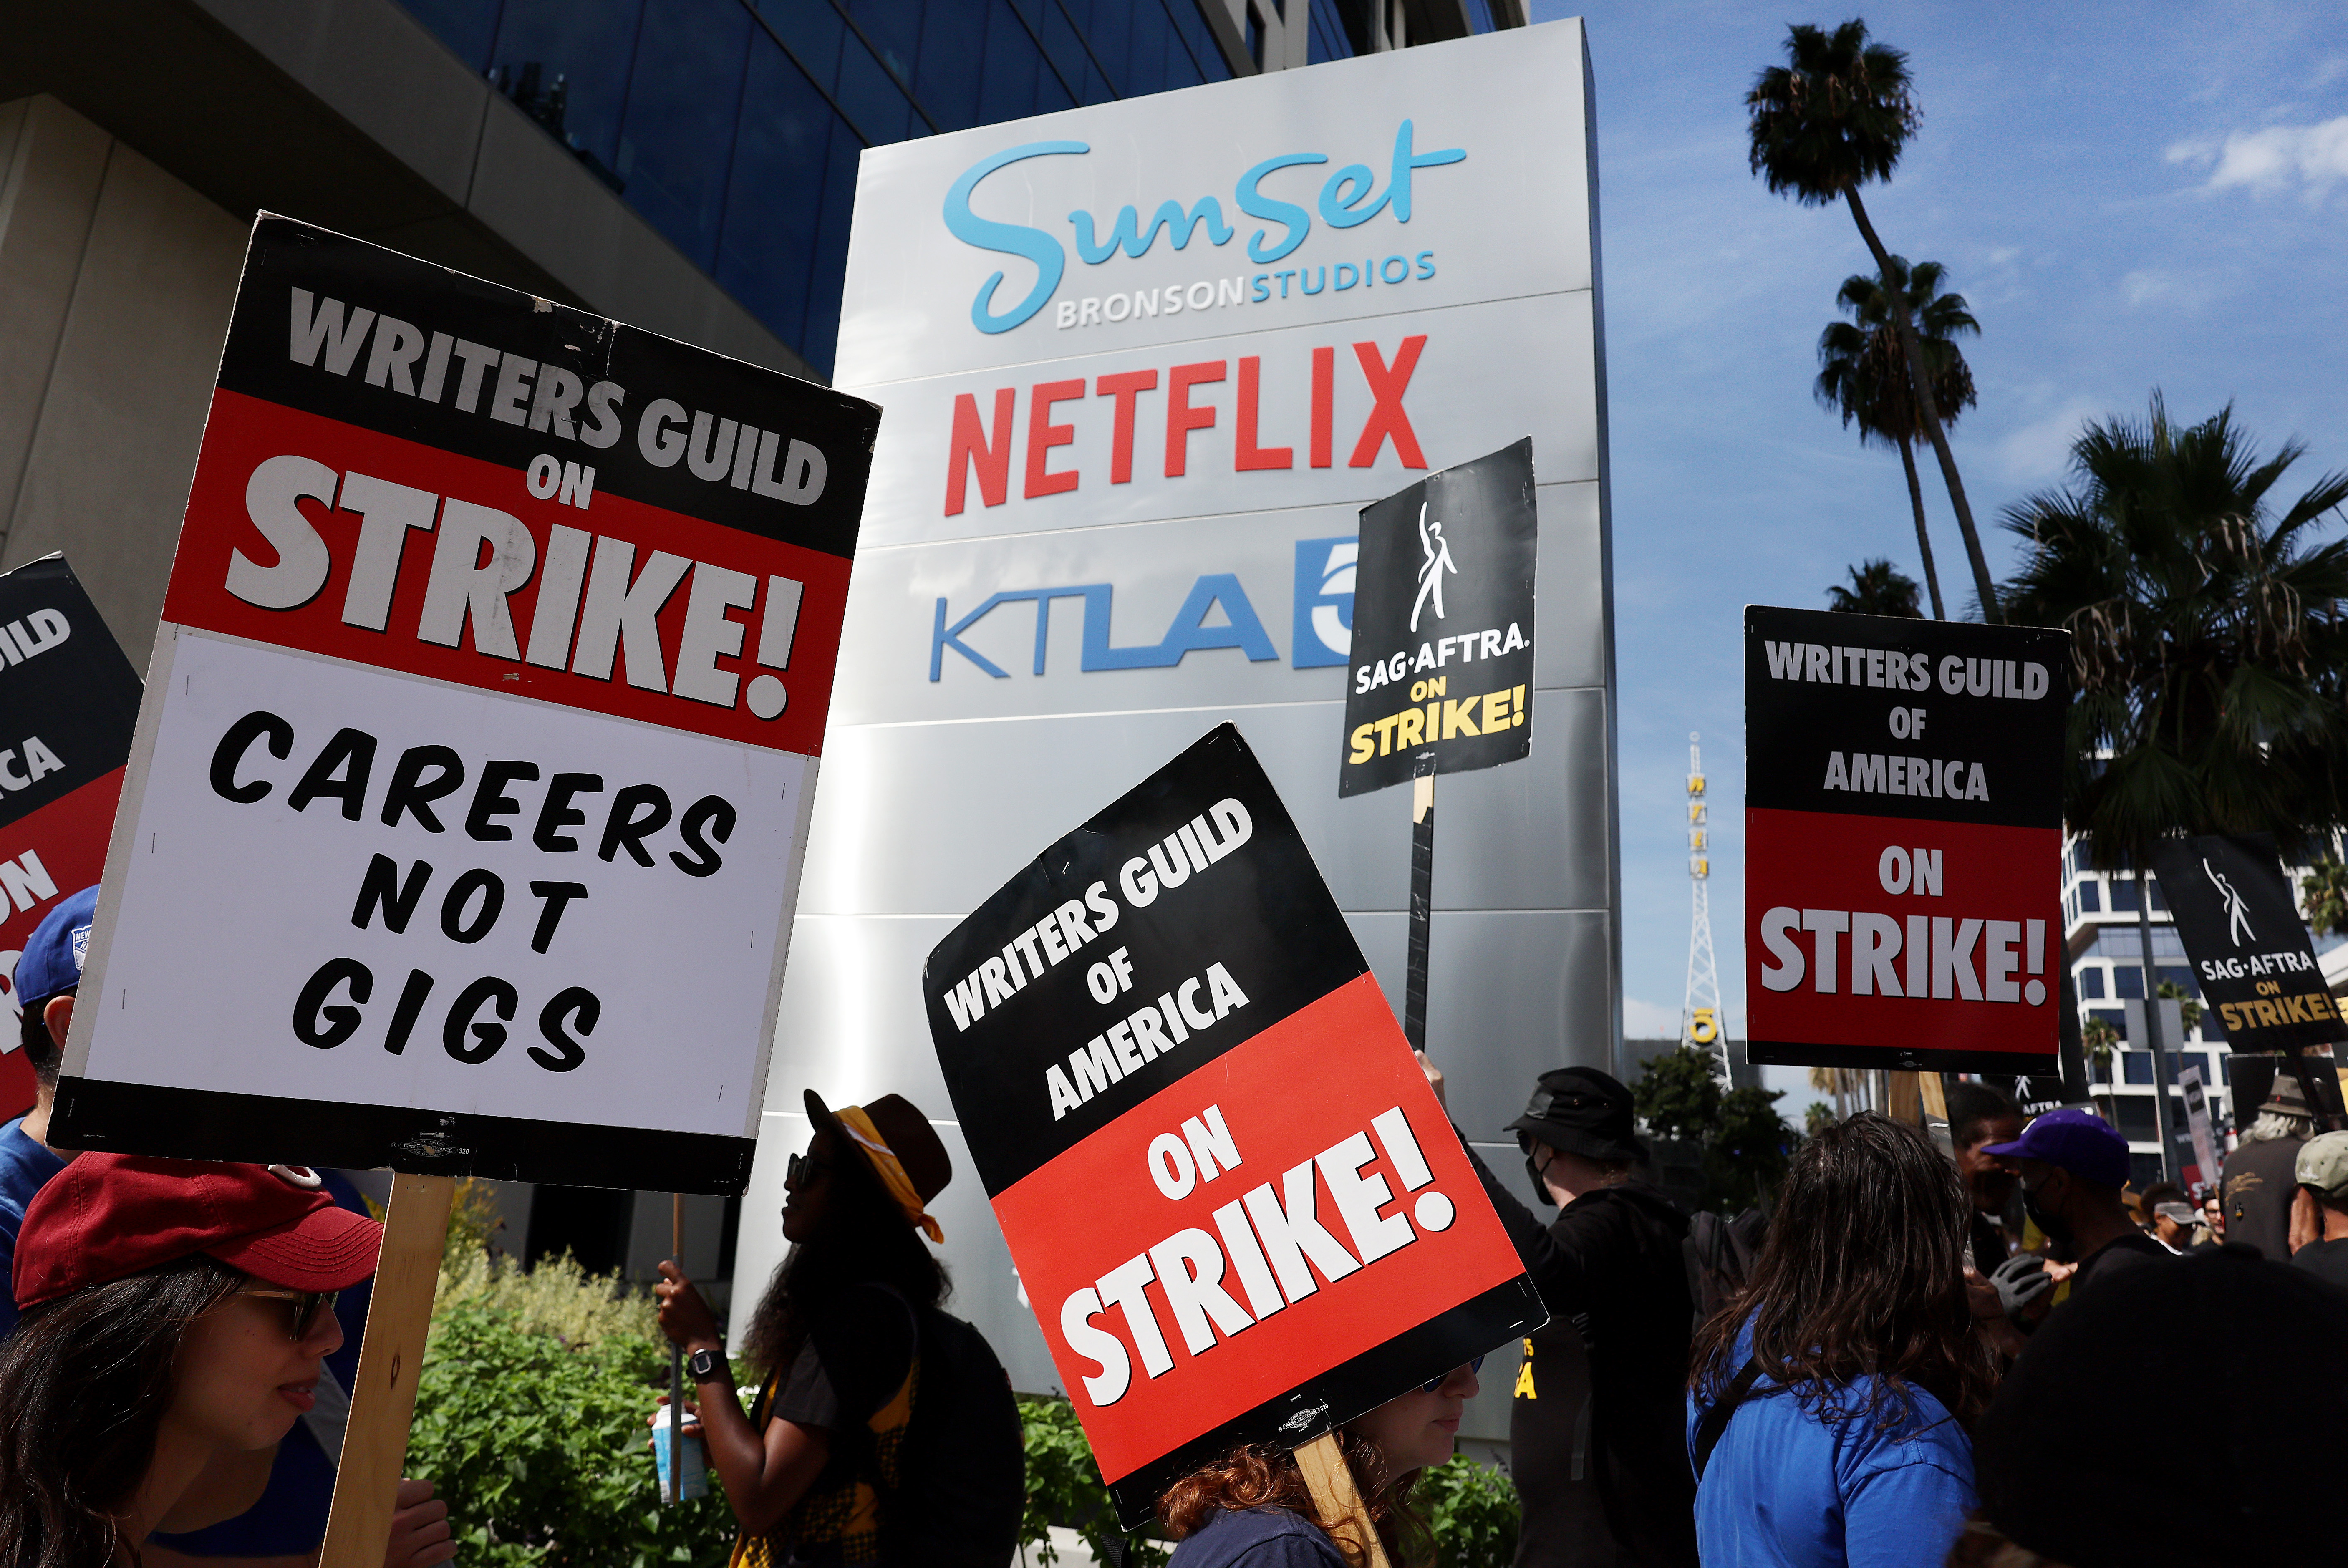 Writers Guild of America members picket near a sign for Netflix and KTLA. Their signs say “Writers Guild on strike!” and “Careers not gigs.”